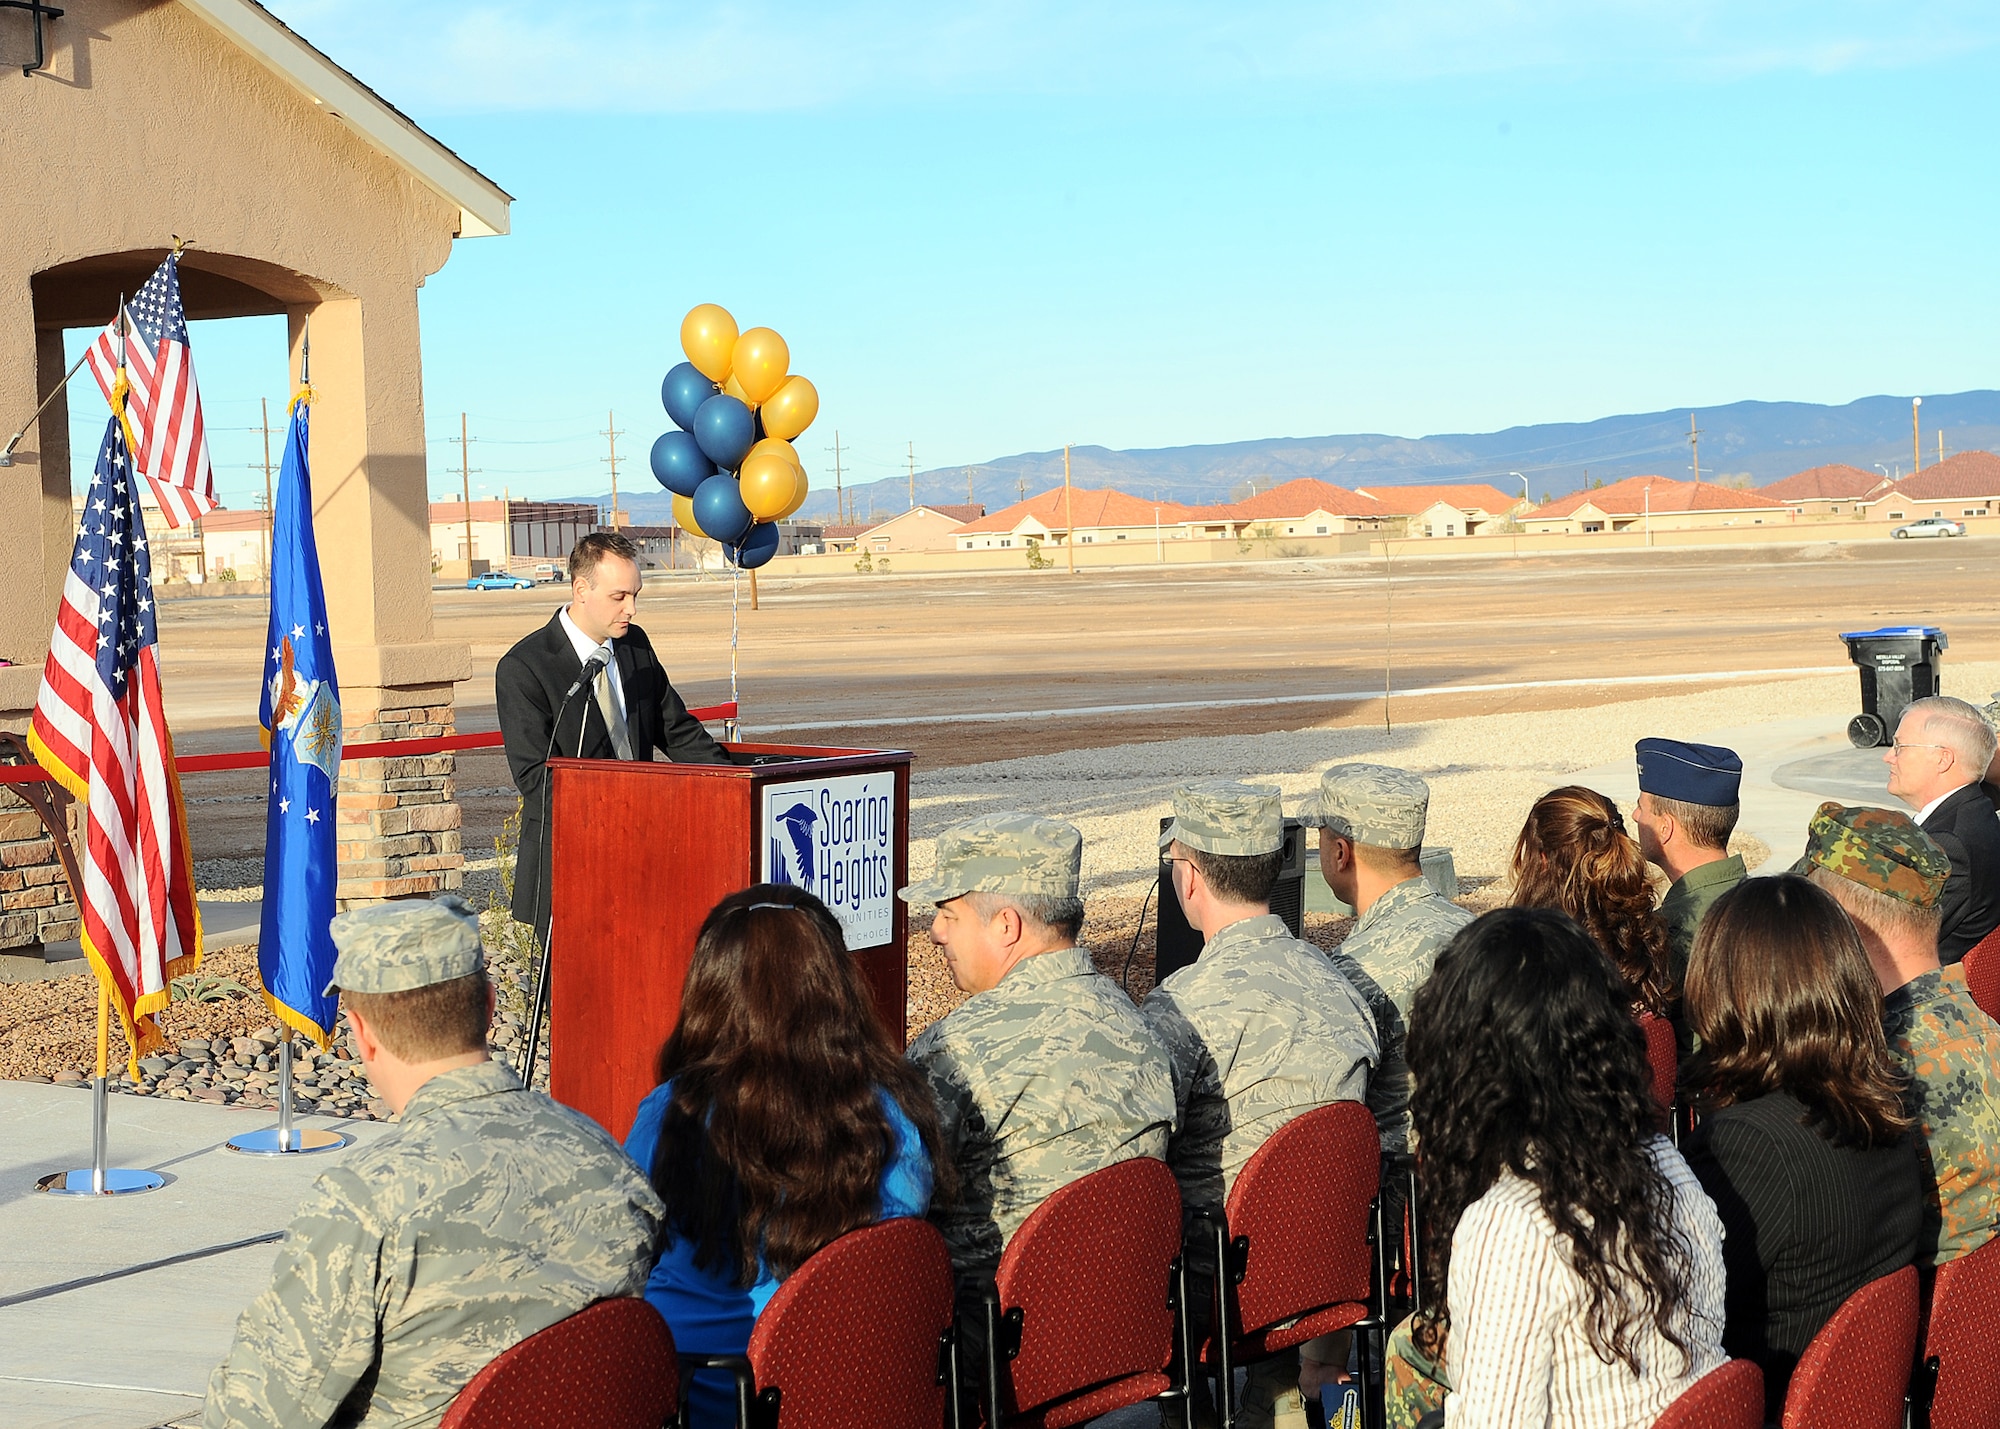 Ryan Kleinau, Soaring Heights Communities project director, speaks at the Soaring Heights ribbon cutting ceremony at Holloman Air Force Base, N.M., Jan.8. Mr. Kleinau played a major role in the new housing development project.